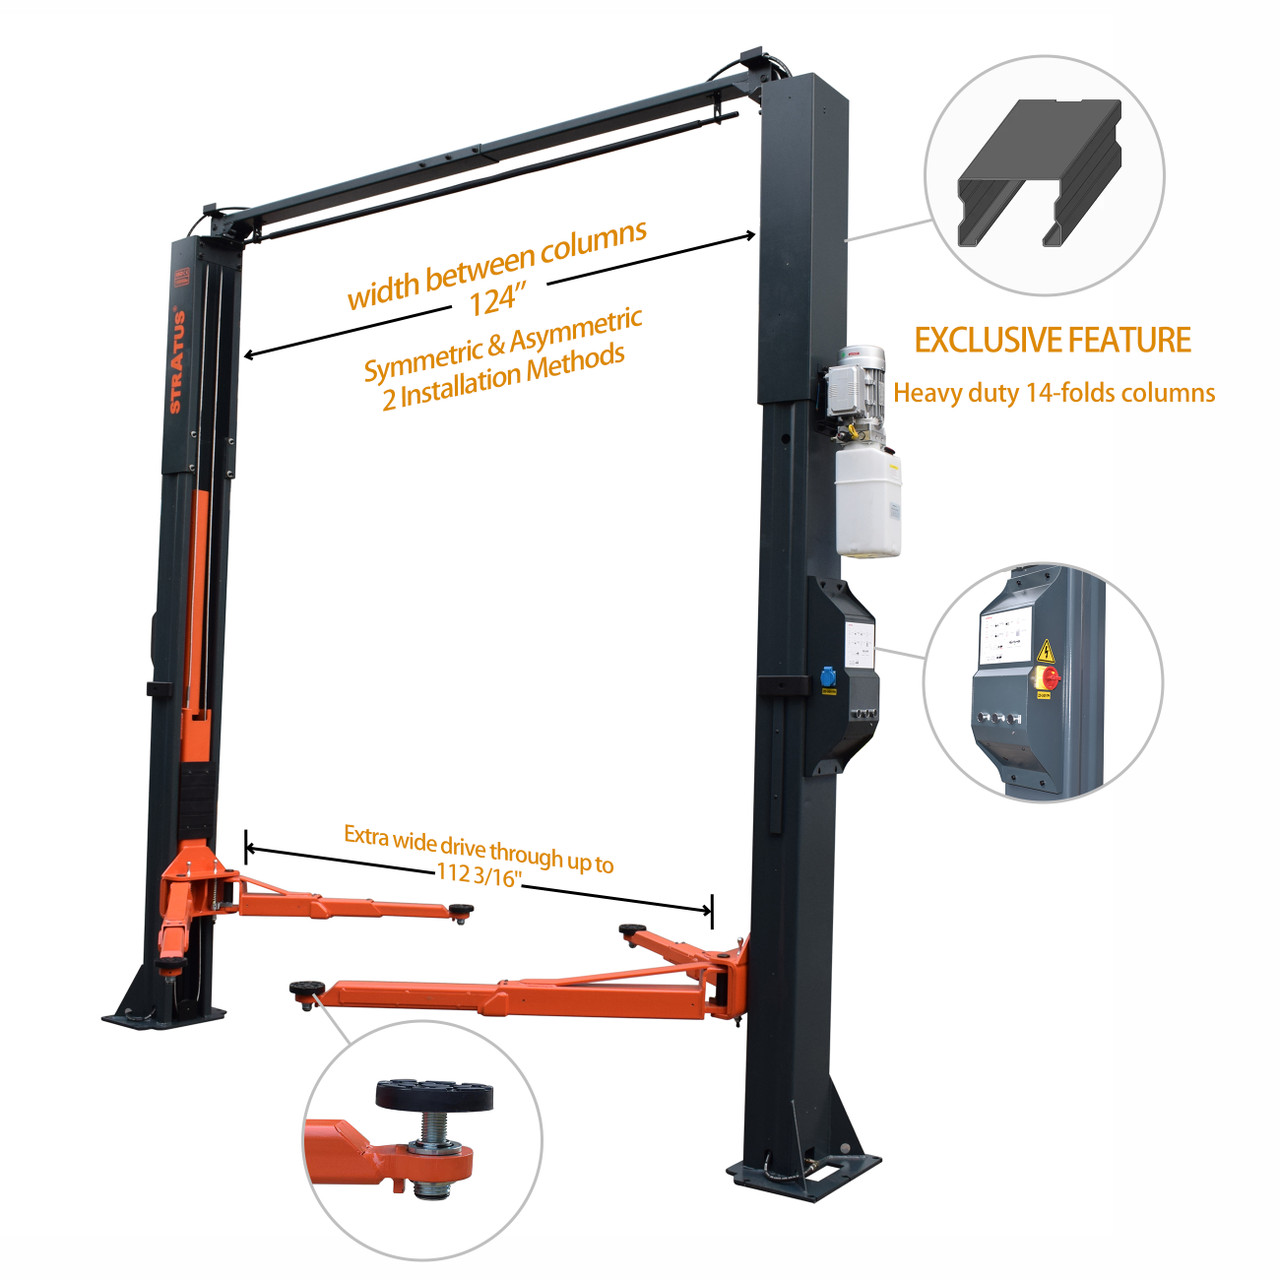 This clear floor two-post lift comes with electric safety lock release design, easy to operate and maintain. It is suitable to hold 10,000 lbs. or less, ideally for inspection, repair and maintenance of various types of vehicles